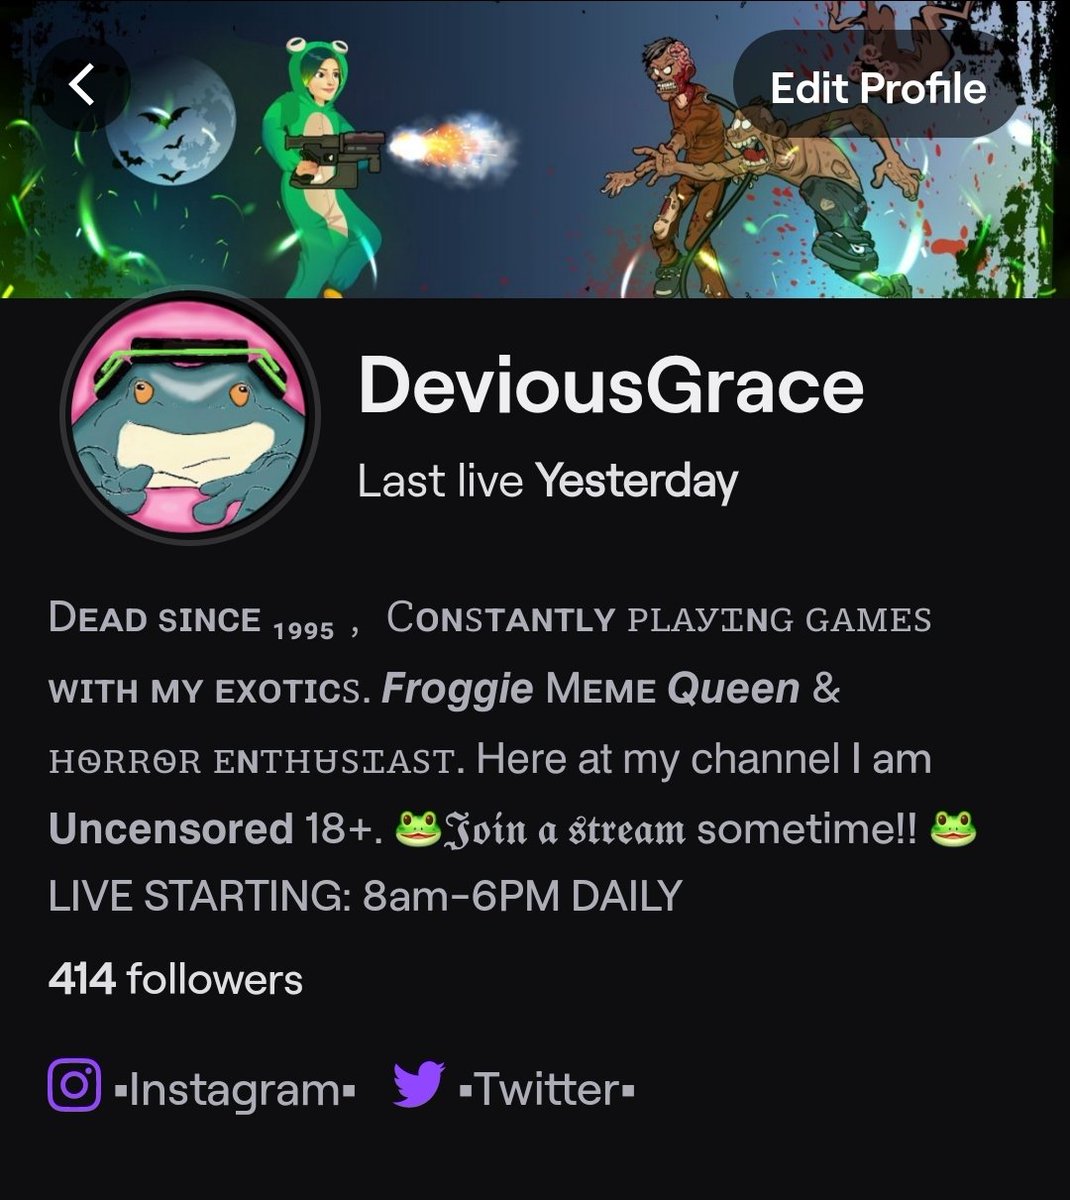 Come on guys just 6 followers away & we have only 4 days left till the end of the year to make our 420 follower goal.

DeviousGrace: twitch.tv/DeviousGrace

#Rt to help your froggie Queen out!!

#Twitch #Twitchaffilate #twitchtv #streamer #Support #StreamerSupport #Horror #frog